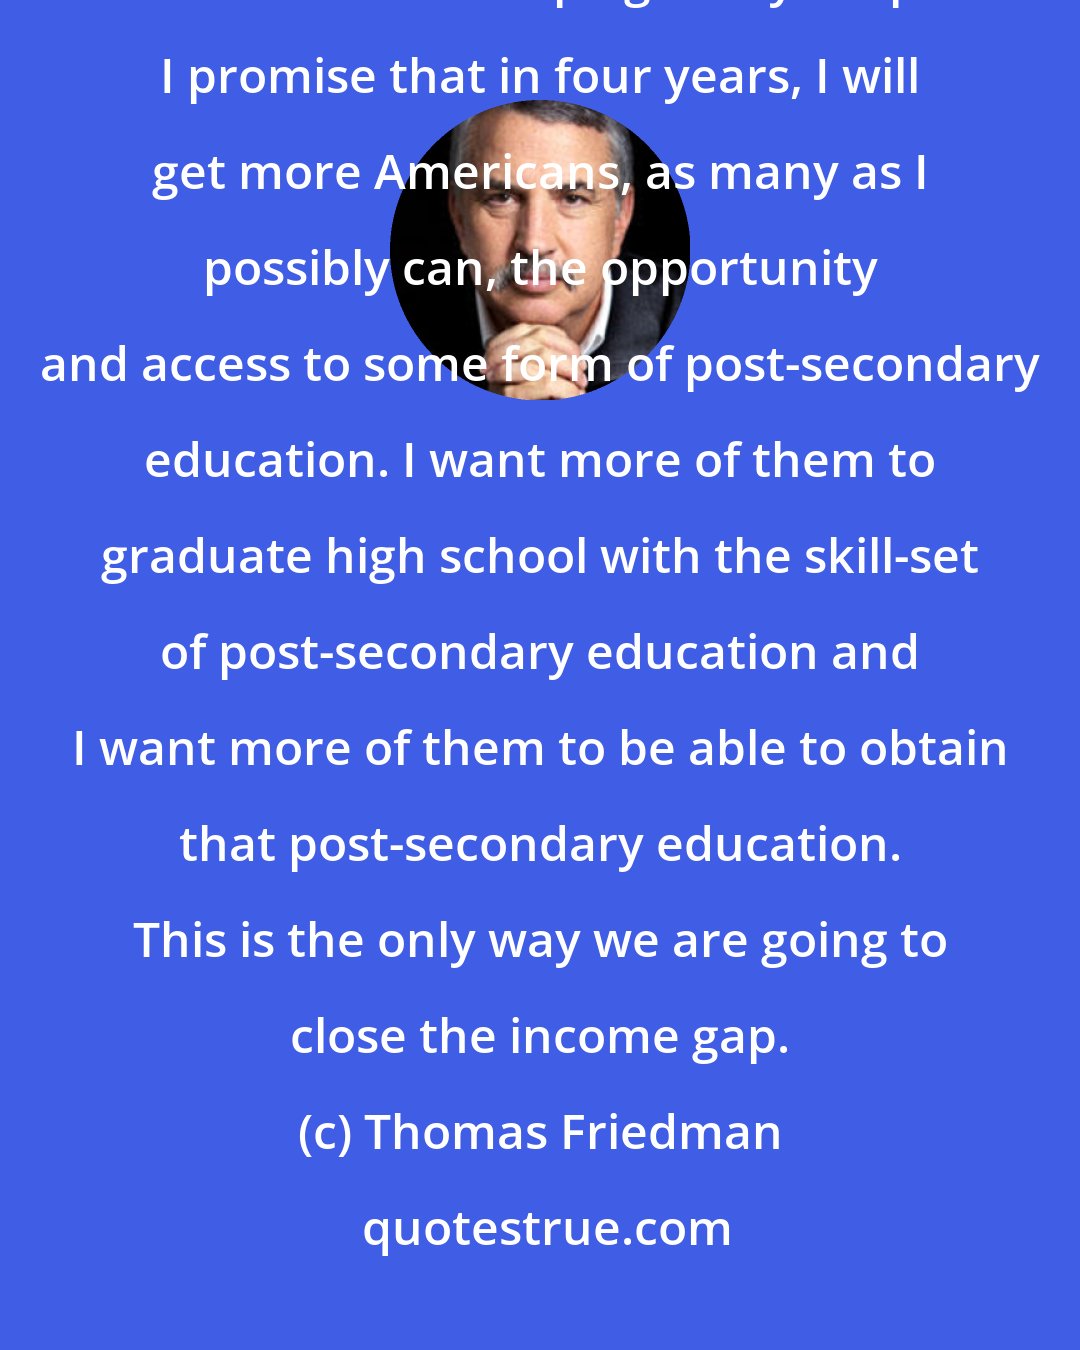 Thomas Friedman: If I were advising President Obama, since he's the one running, I would have made his campaign very simple. I promise that in four years, I will get more Americans, as many as I possibly can, the opportunity and access to some form of post-secondary education. I want more of them to graduate high school with the skill-set of post-secondary education and I want more of them to be able to obtain that post-secondary education. This is the only way we are going to close the income gap.